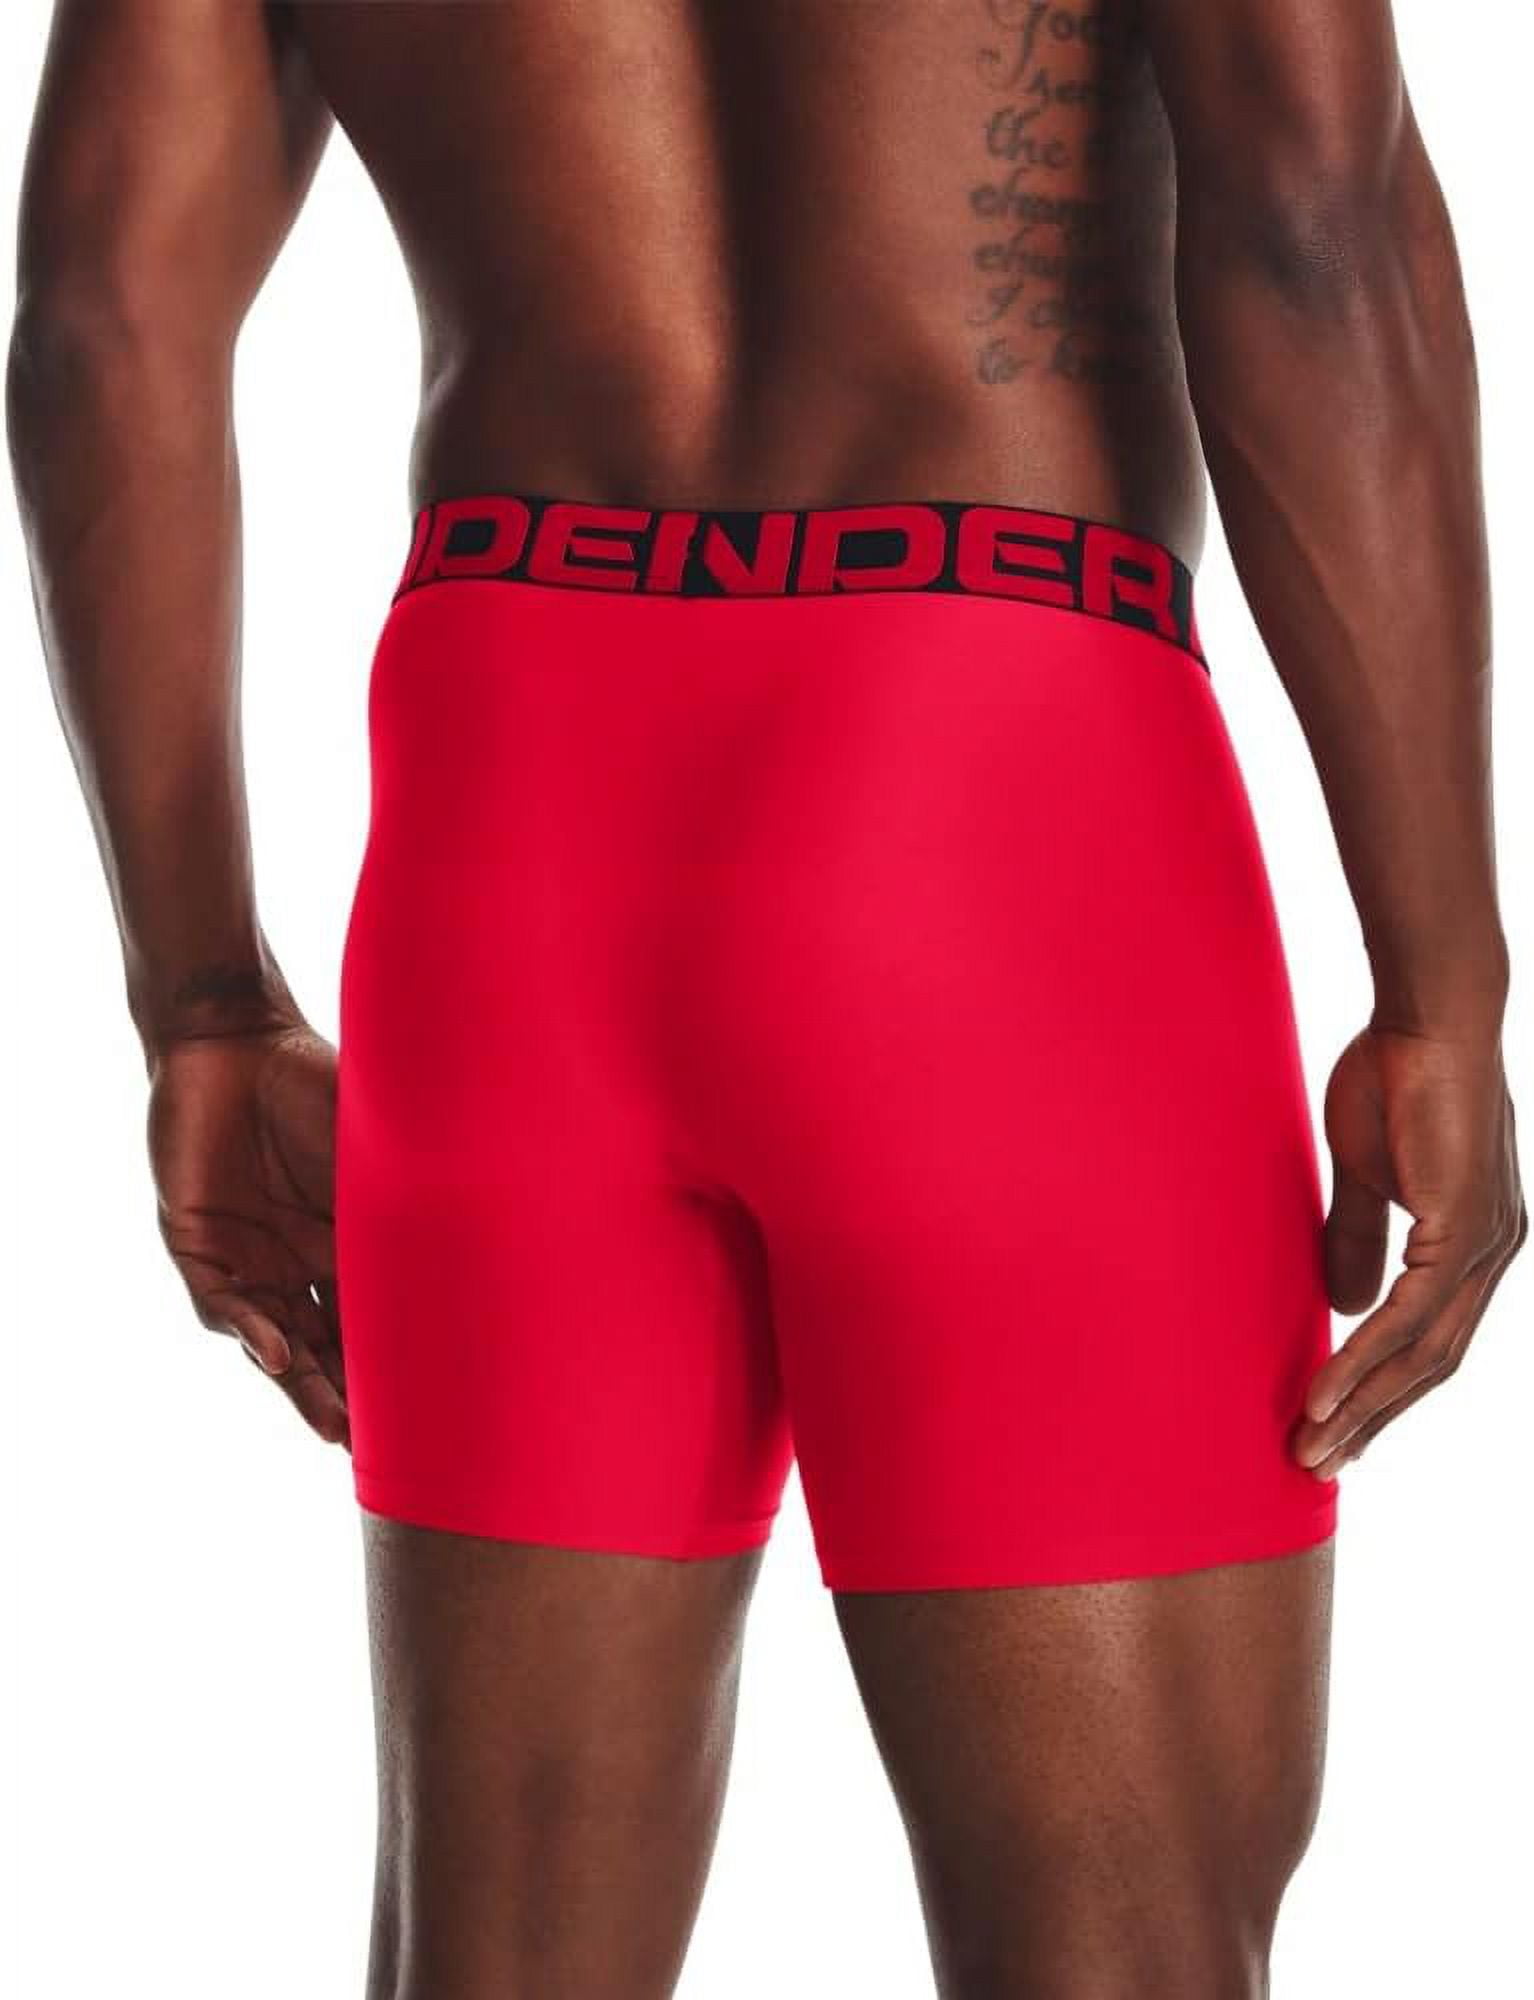 1/6 scale XXL red trunks men's underwear for - Buy one-sixth